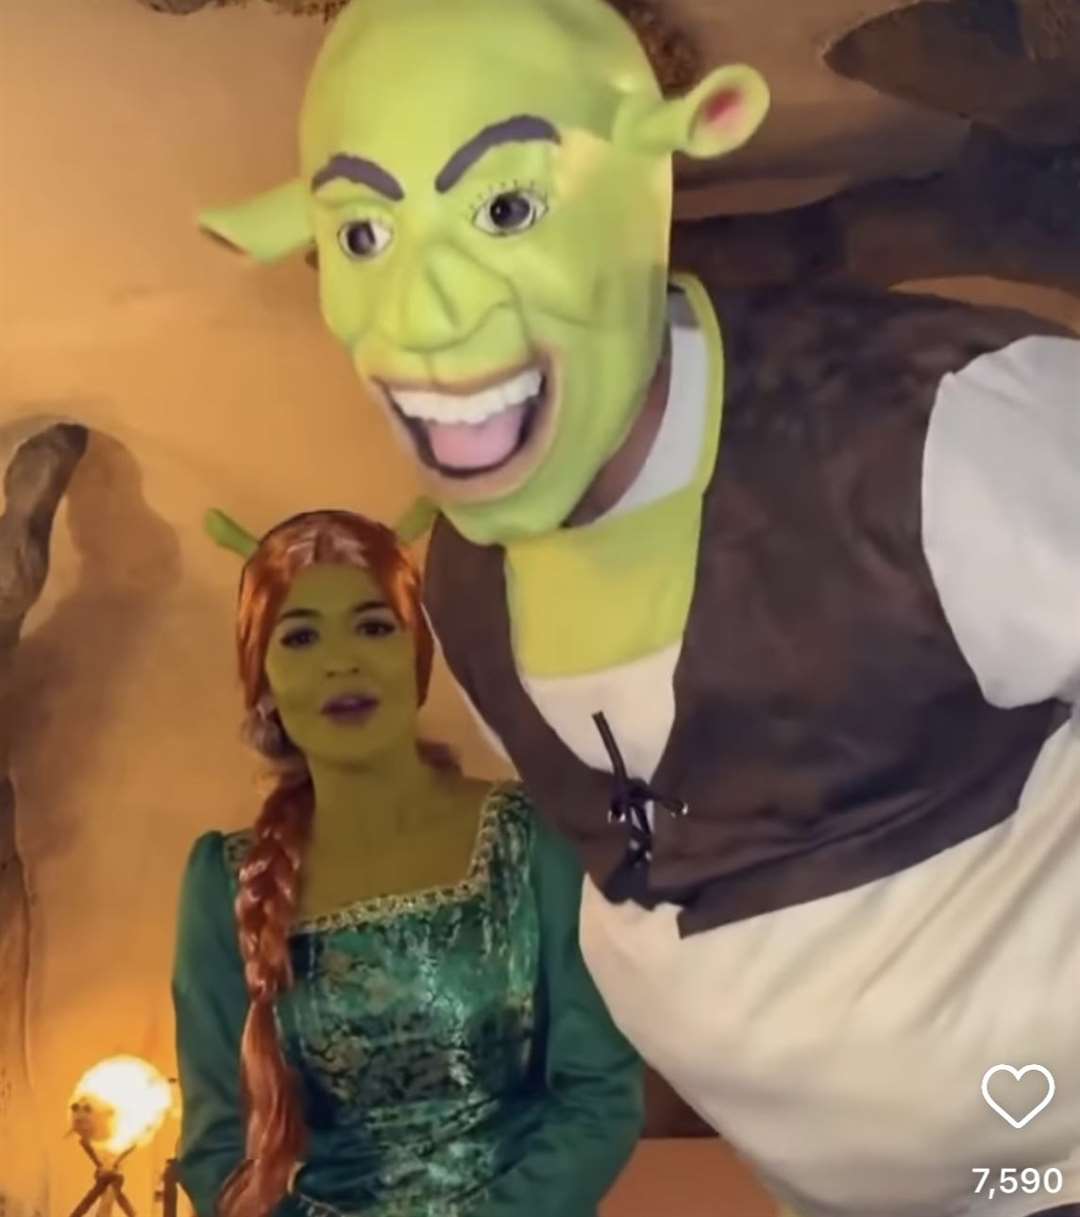 Don't mind us, we're just two grown adults dressing up around Shrek's , Taika Waititi